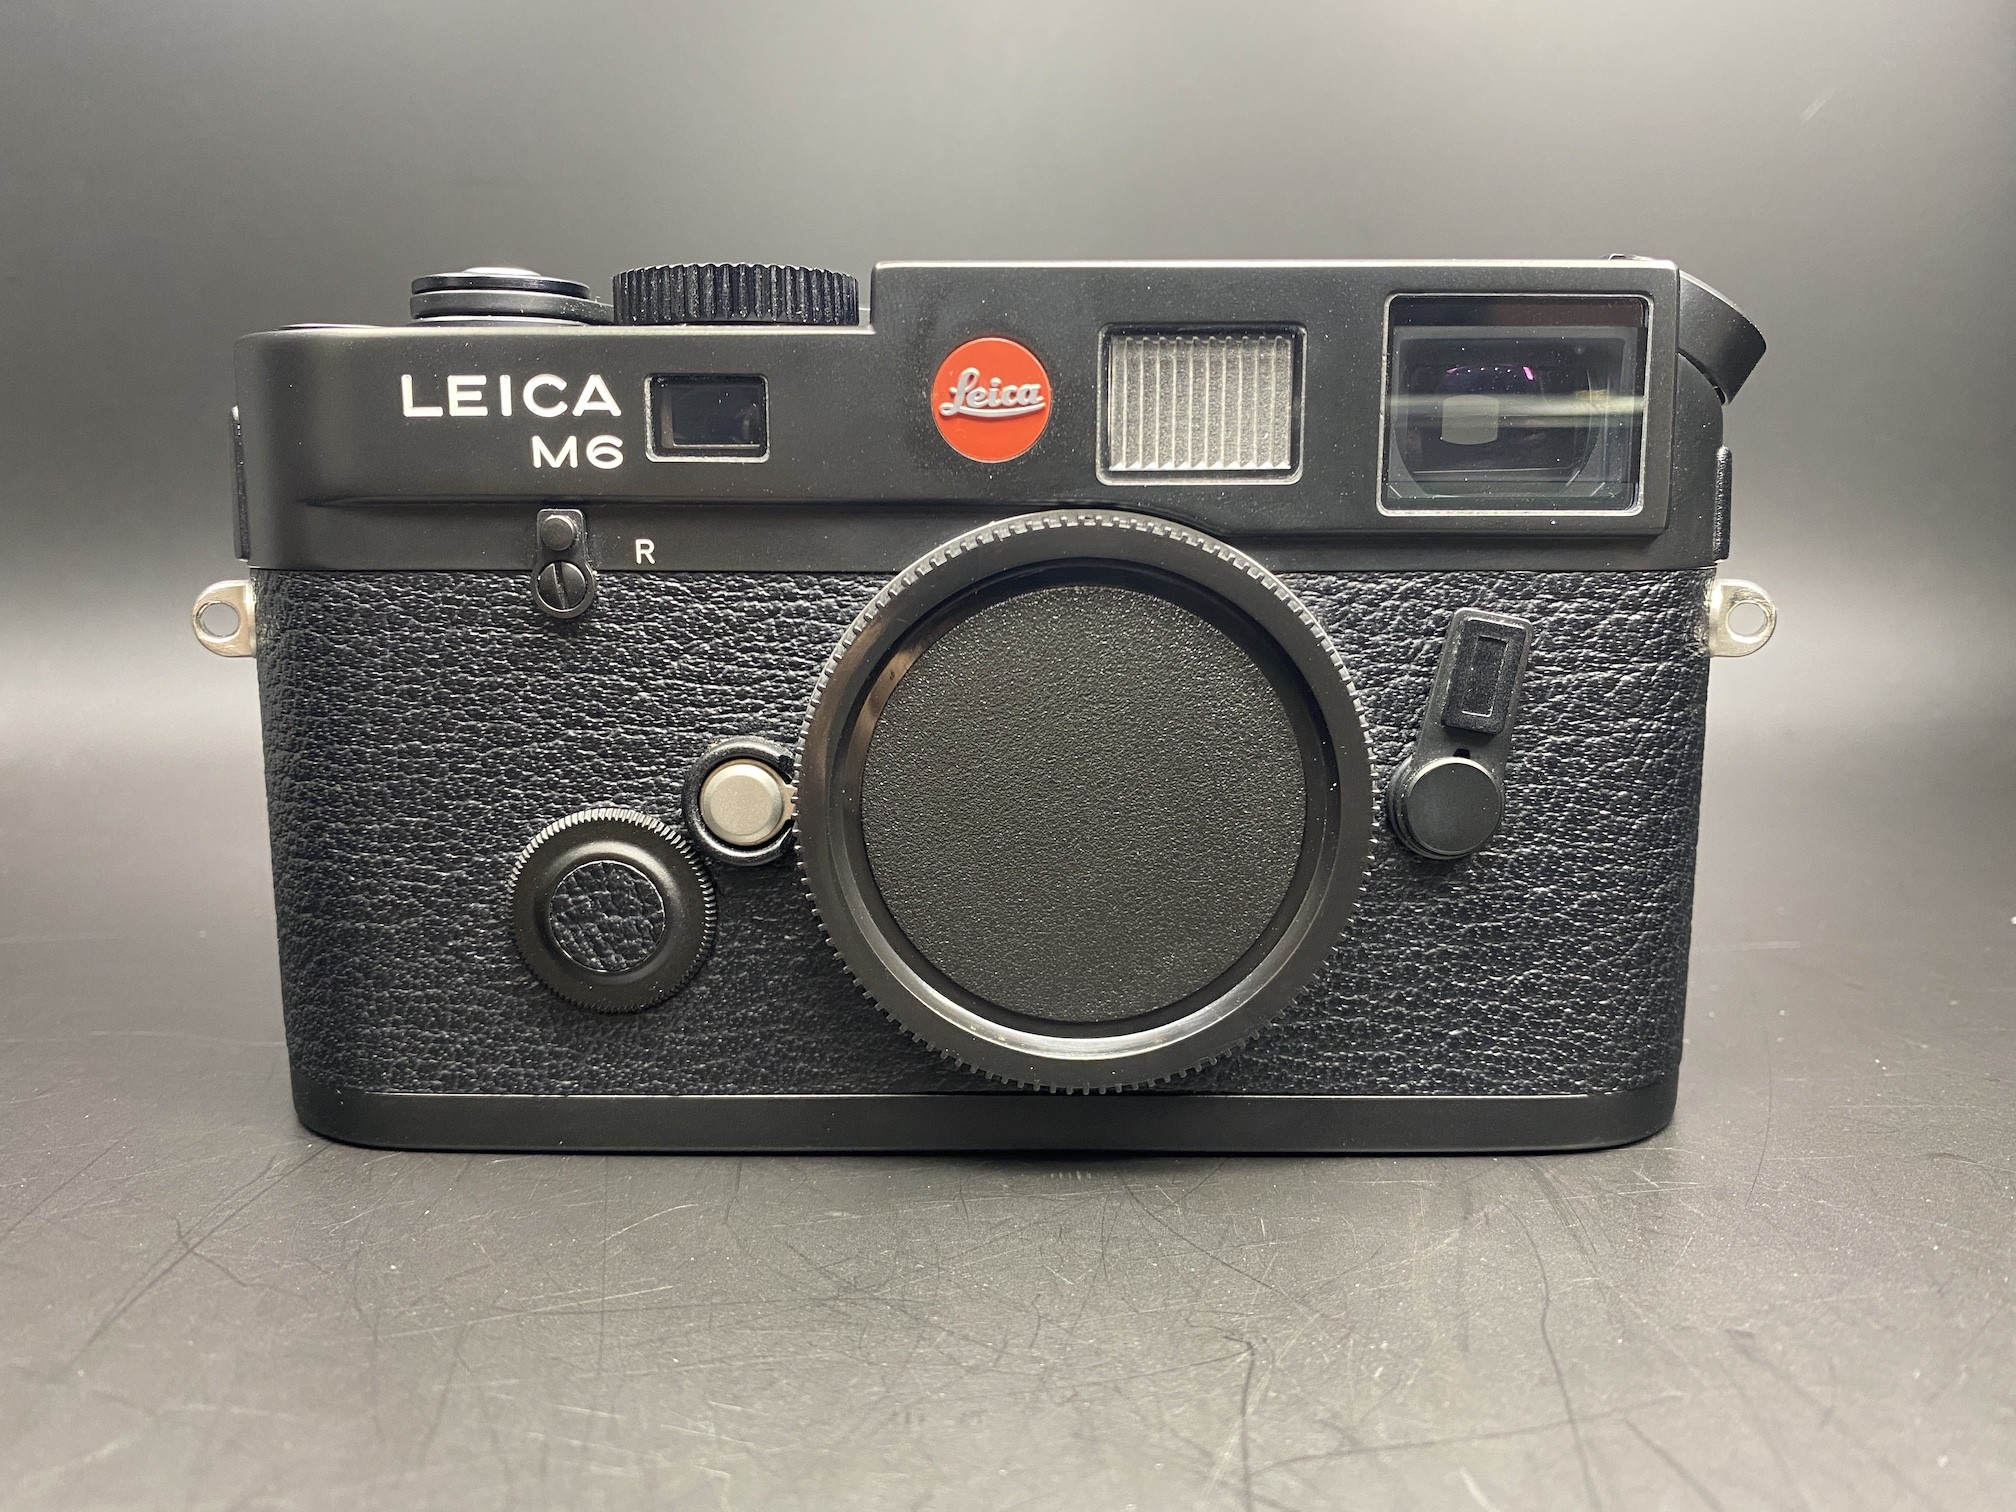 Leica M6 0.58 TTL Film Camera Black (Used) JAPAN edition with top 